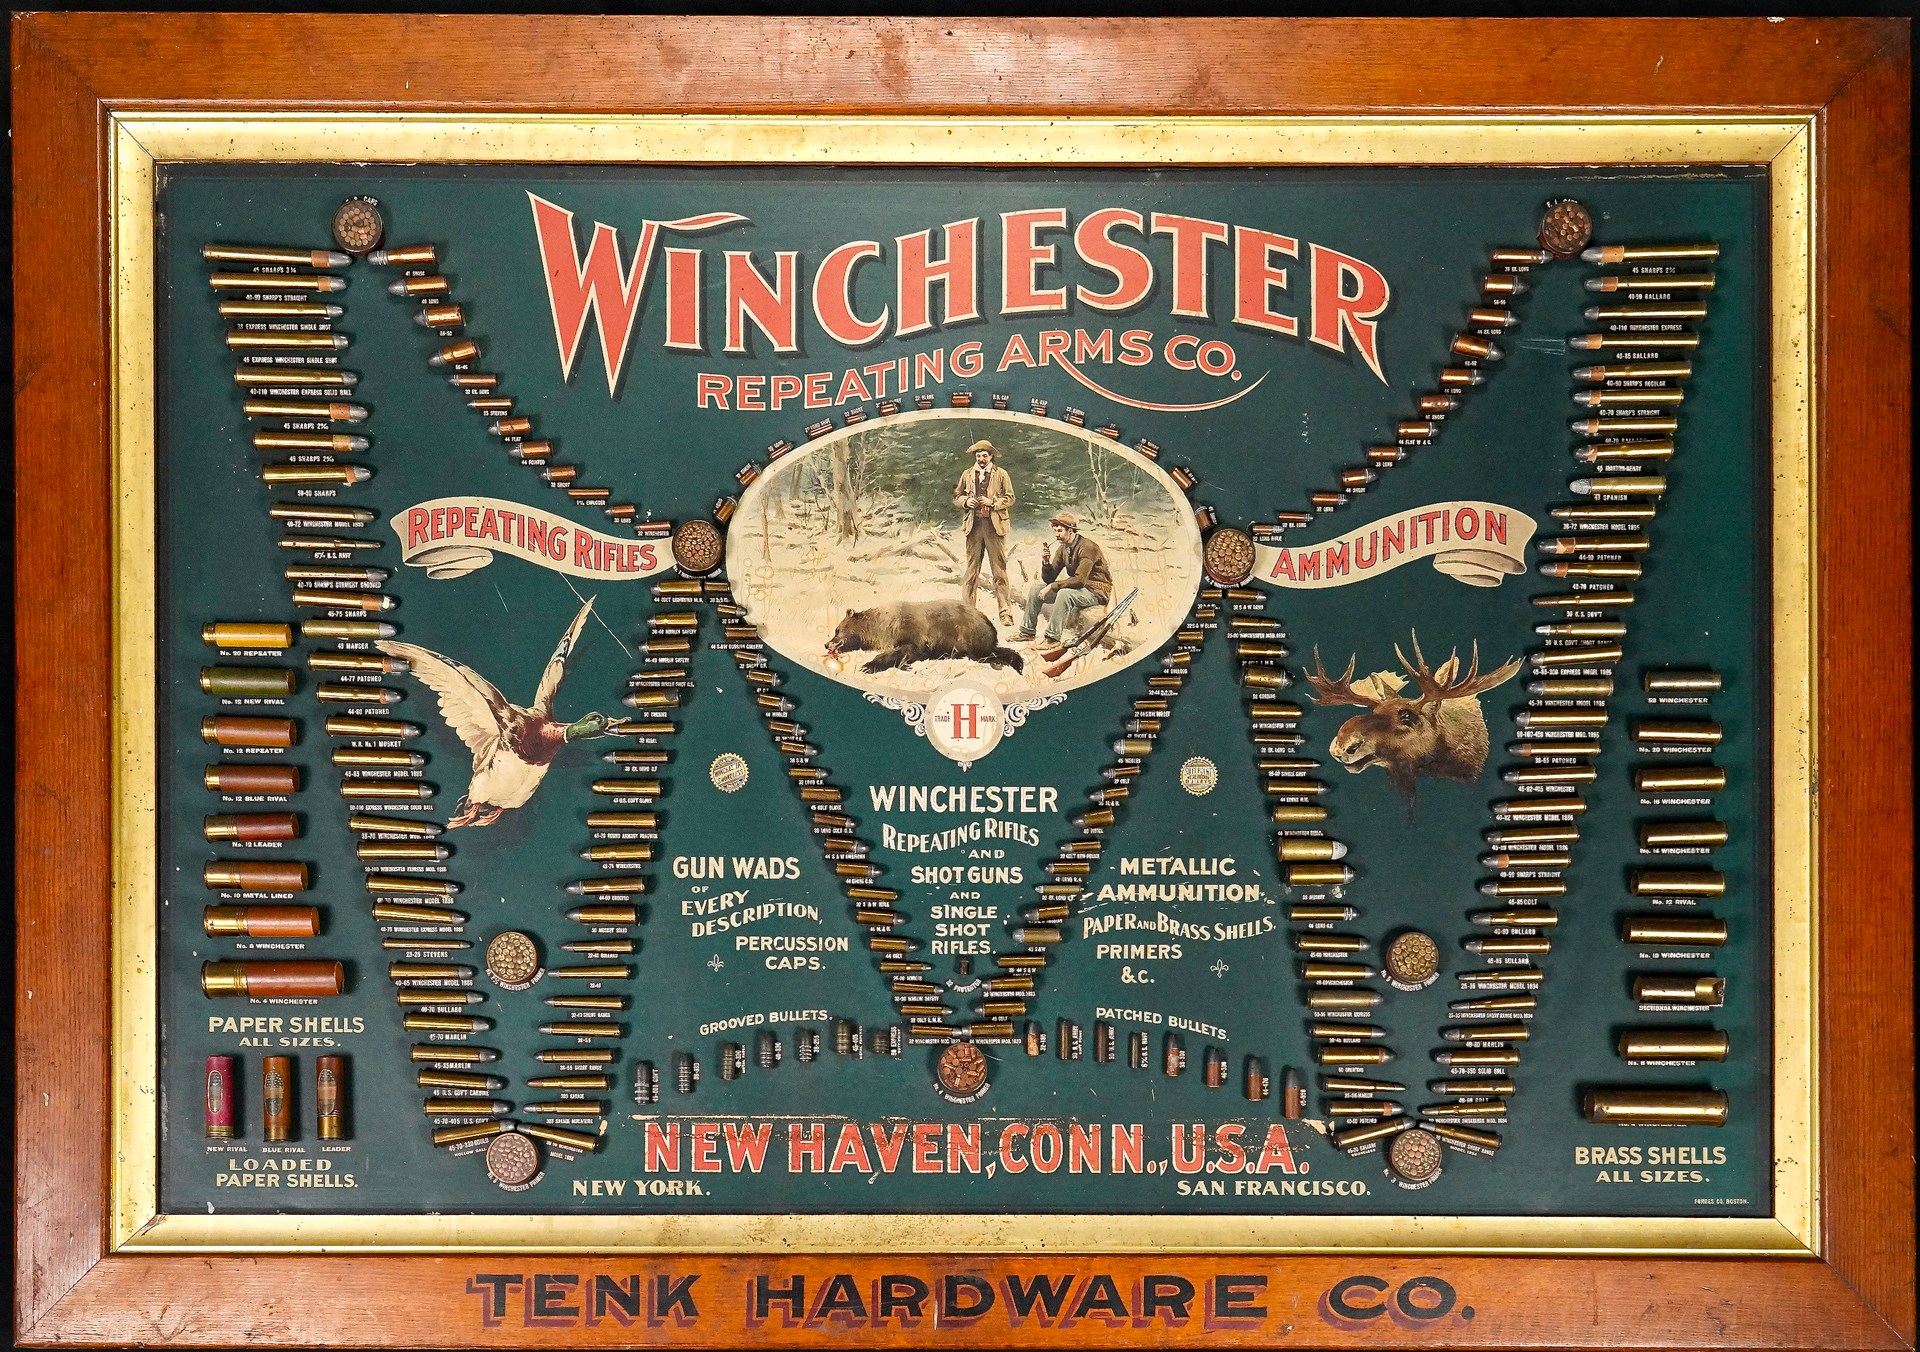 A 100% complete Winchester “Double W” 1897-era ammunition board will be auctioned off.